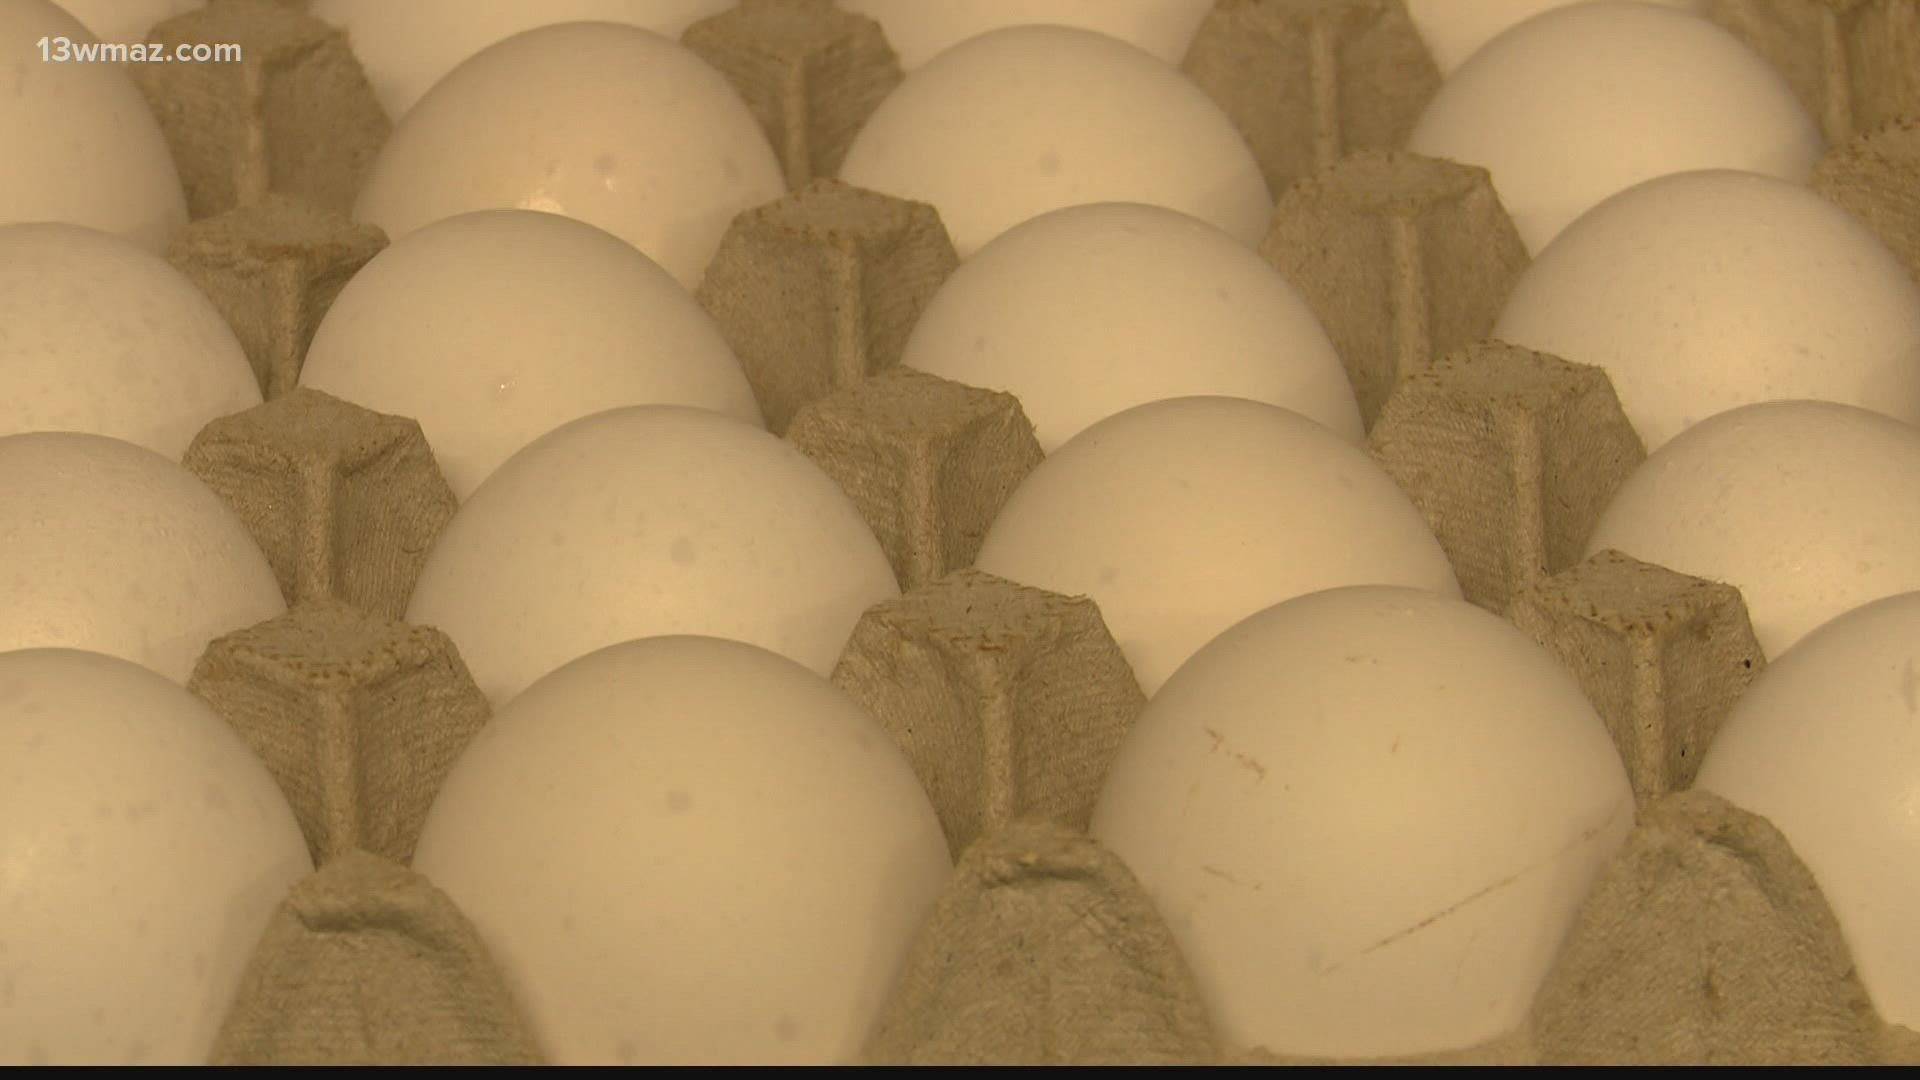 H&H general manager Tandrea Myers says eggs went from $75 a case to nearly $200.